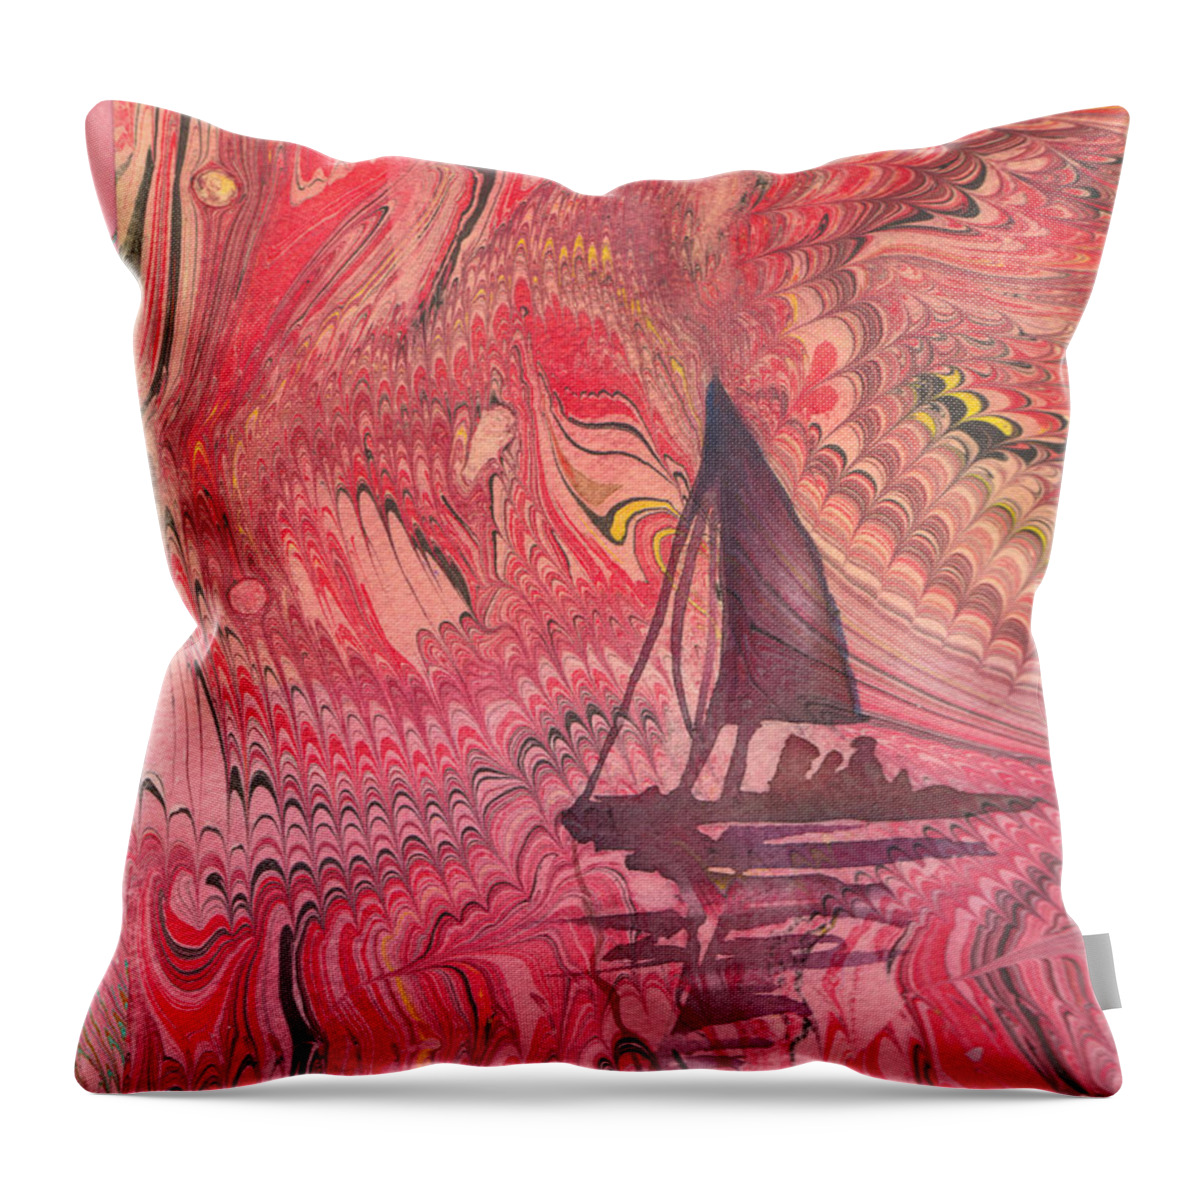 Watercolor On Marbled Paper Throw Pillow featuring the painting Red Marbled Sailboat by Denice Palanuk Wilson